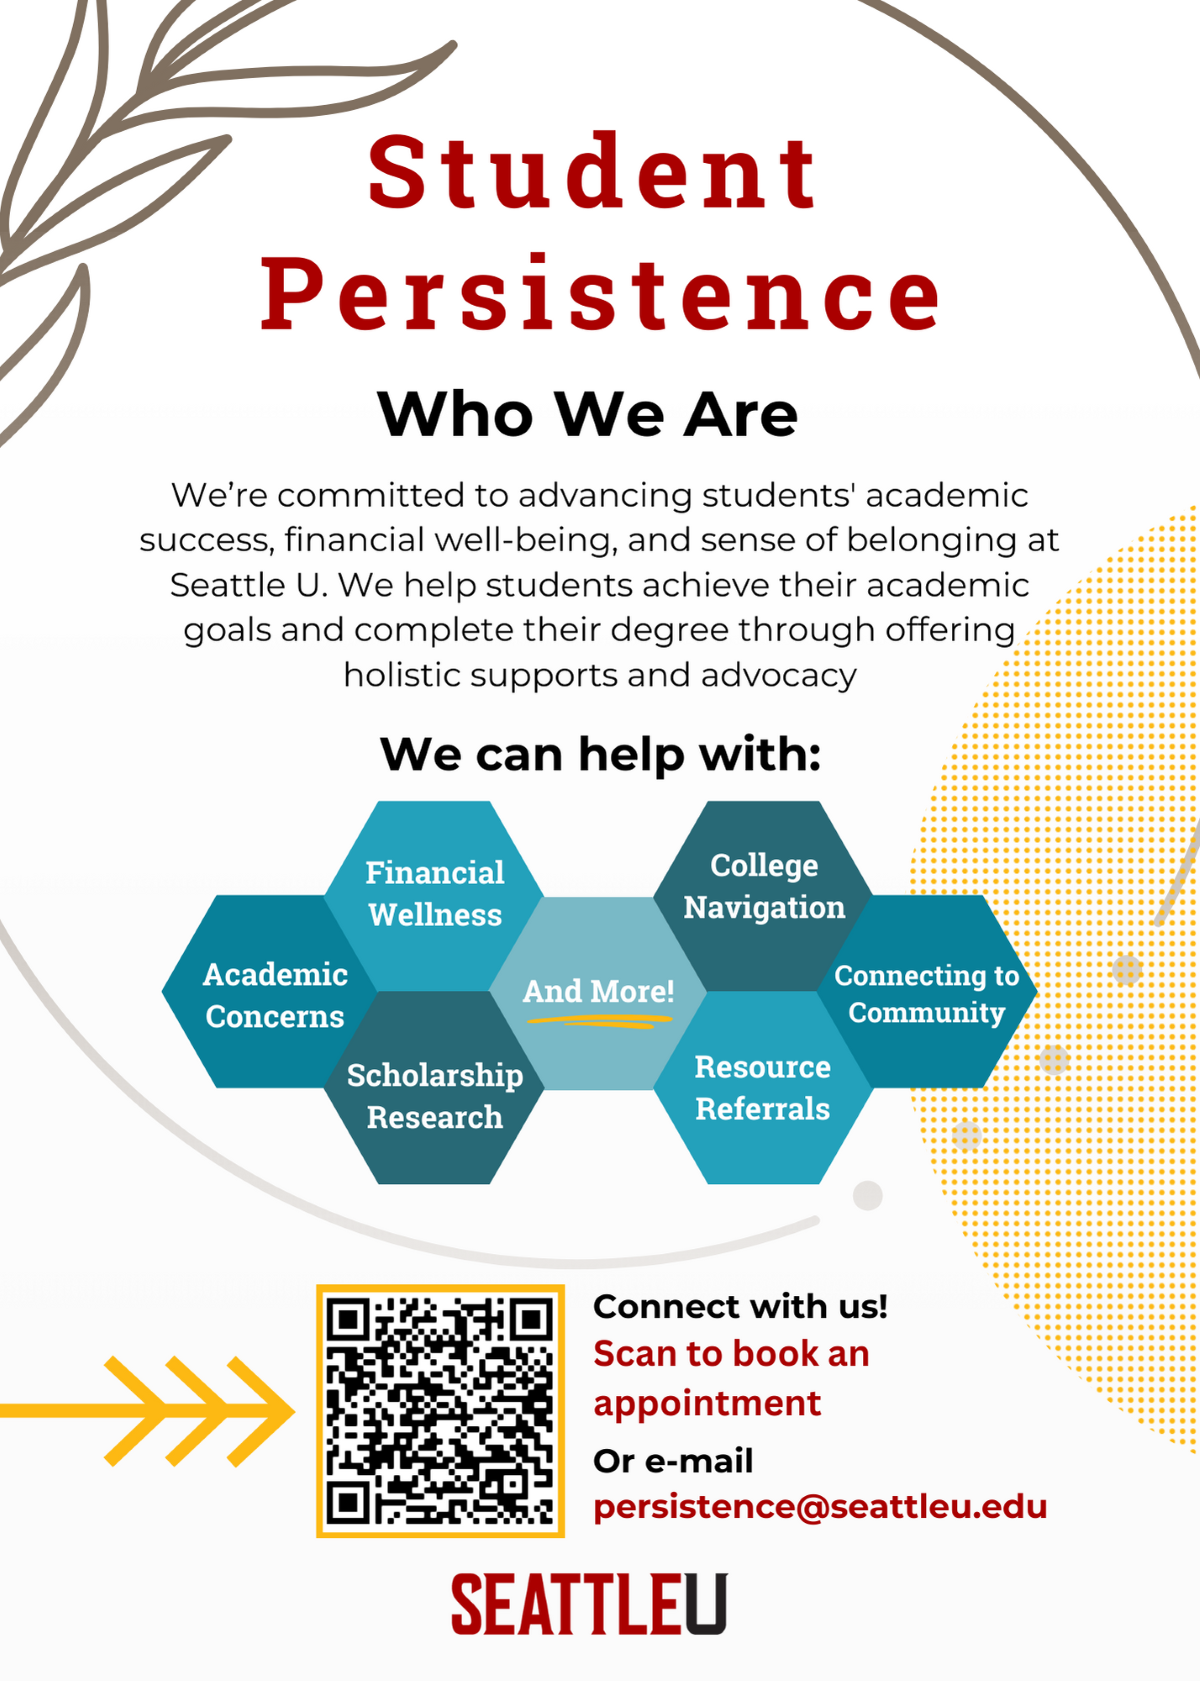 Student Persistence flyer